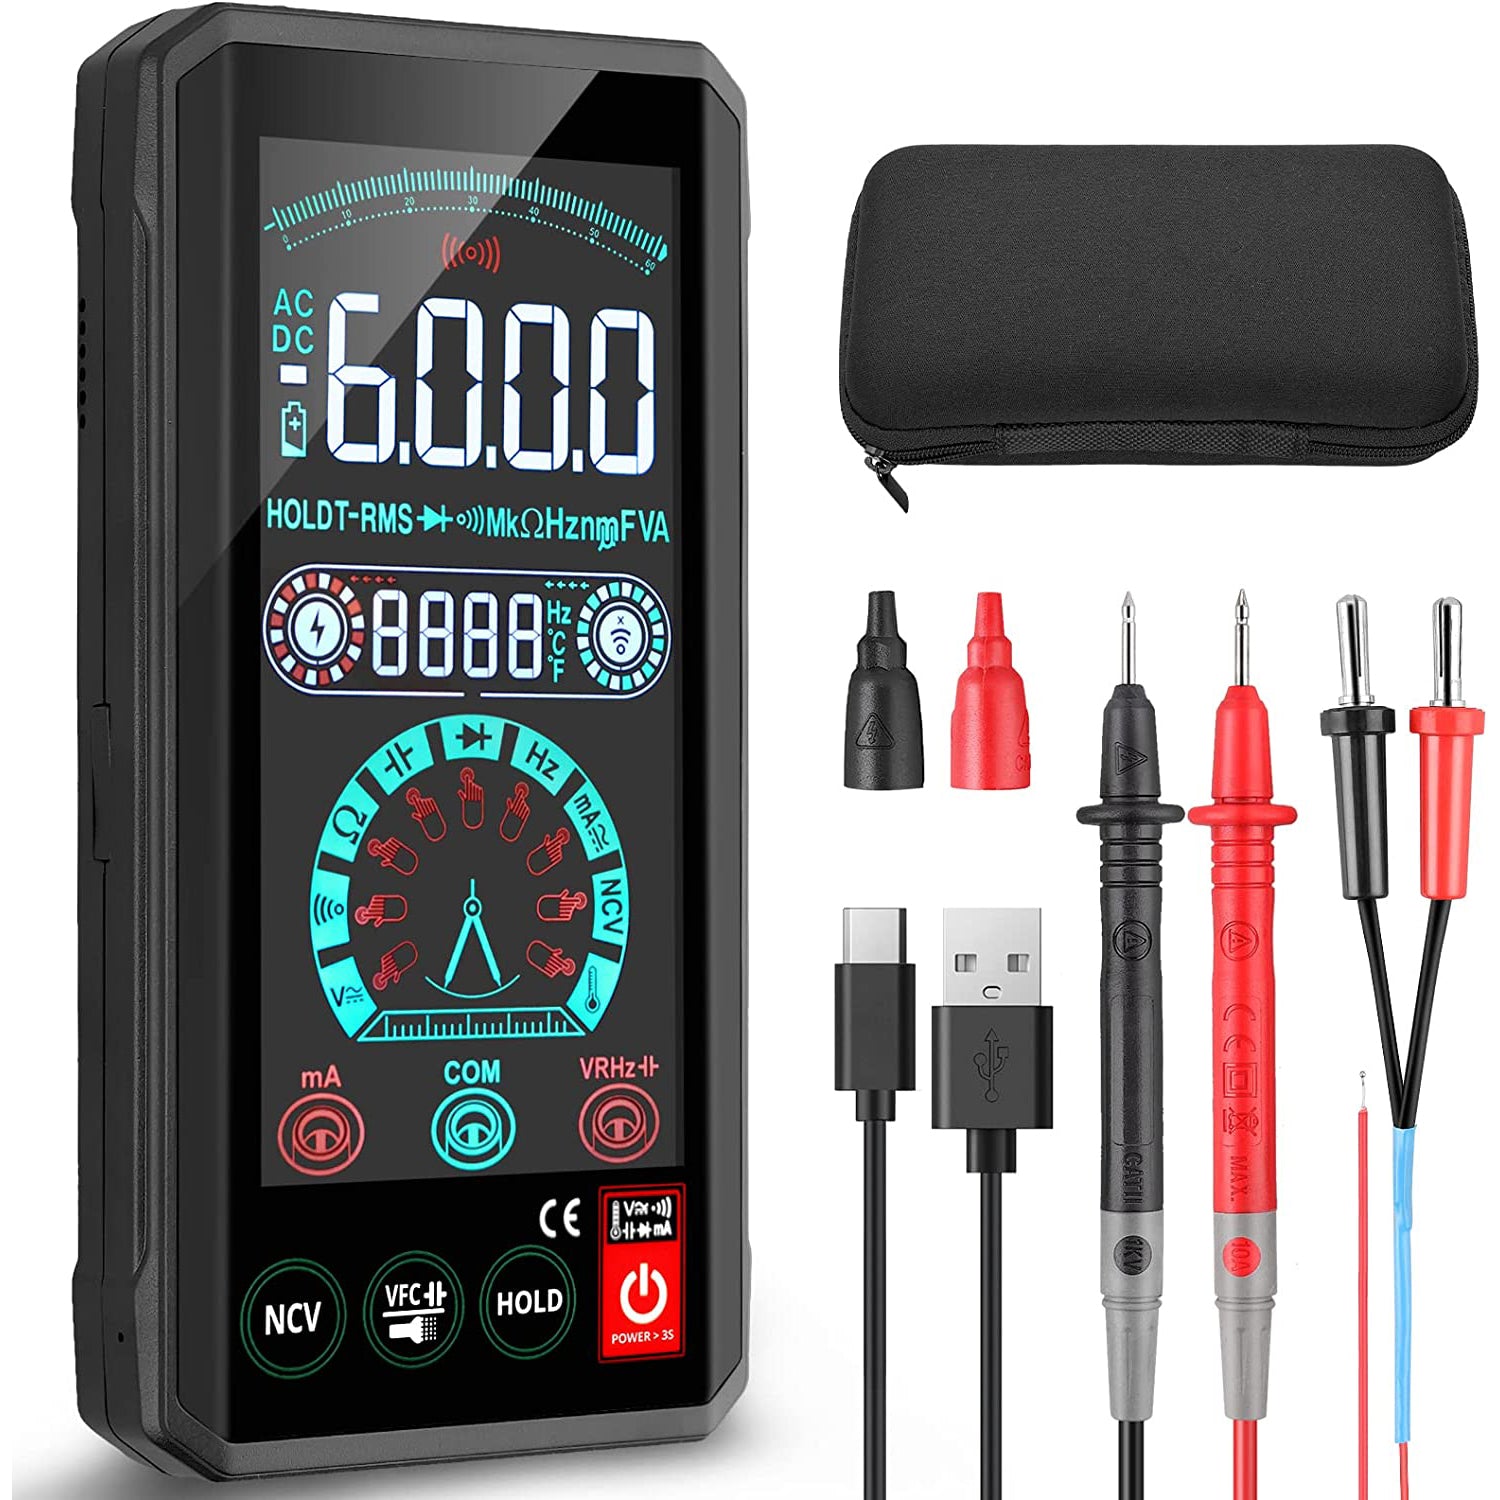 Neoteck Rechargeable Multimeter with Smart Touch Screen 6000 Counts